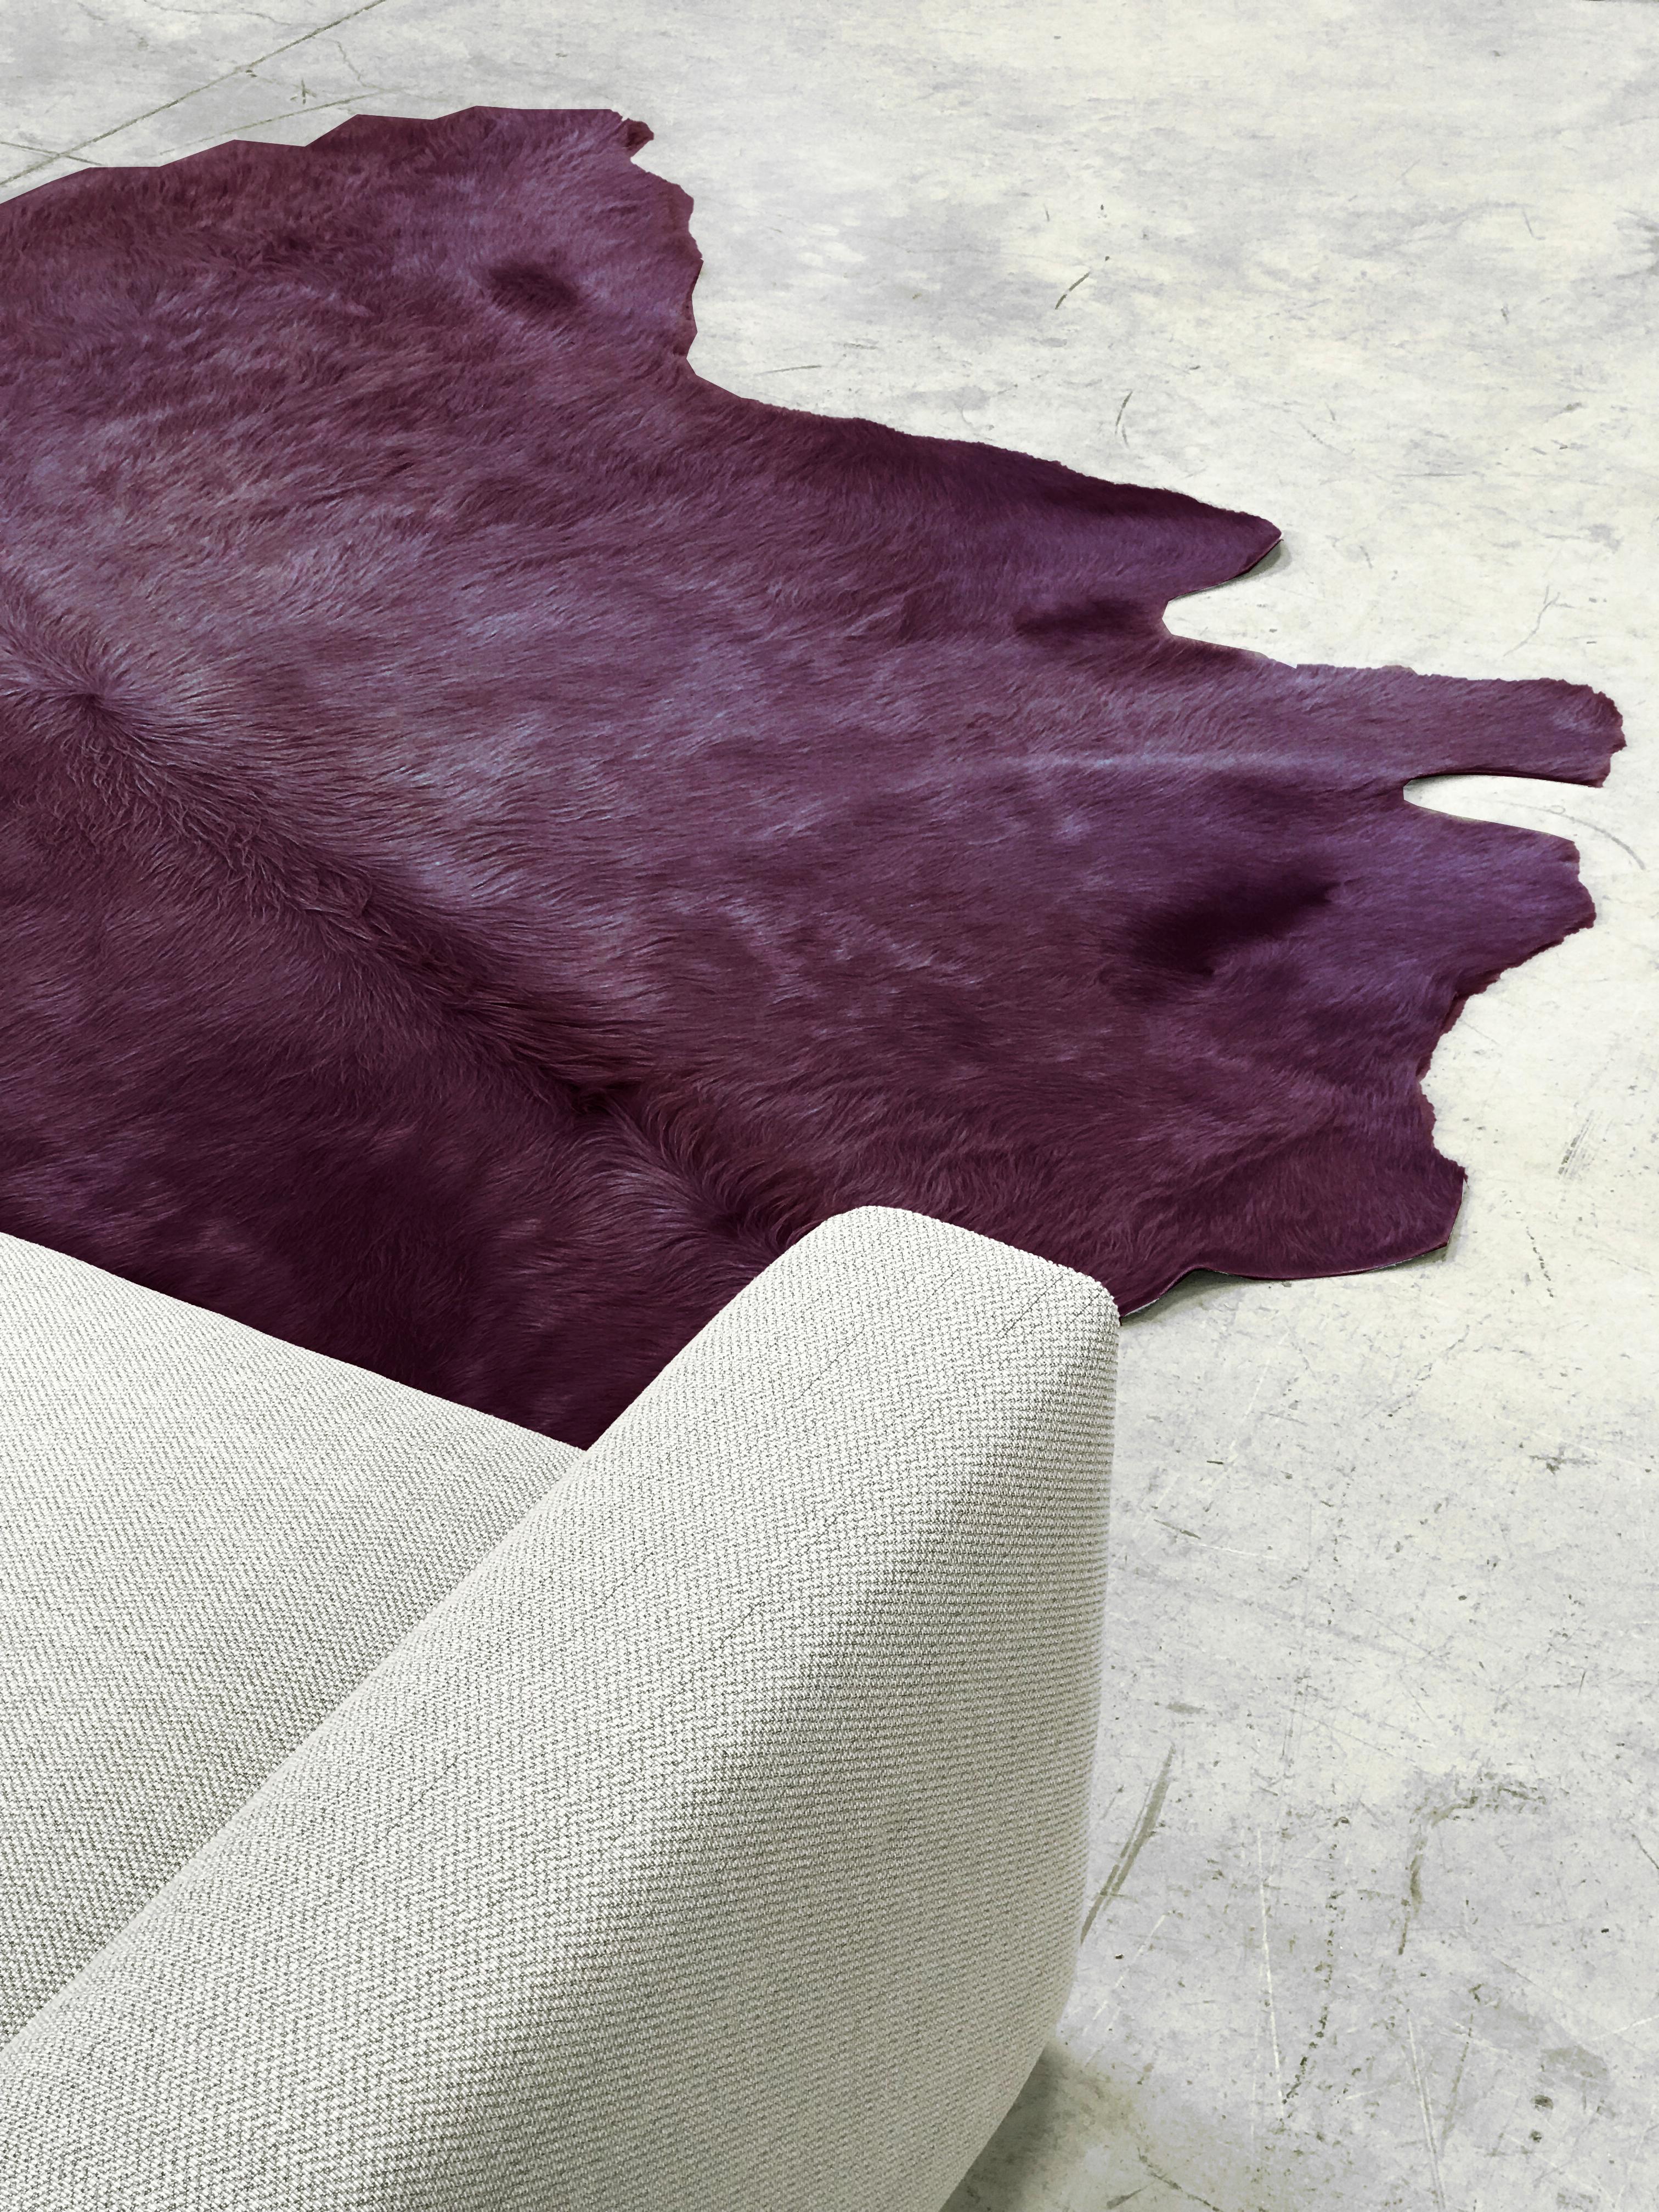 Cowhide rugs in Khaki, sustainably sourced and hand-dyed.
Approximate dimensions: 230-260 x 230-260cm
Six different colors: Salmon pink, burgundy, khaki, light grey, mid grey and black

Please note that color hues may vary from batch to batch